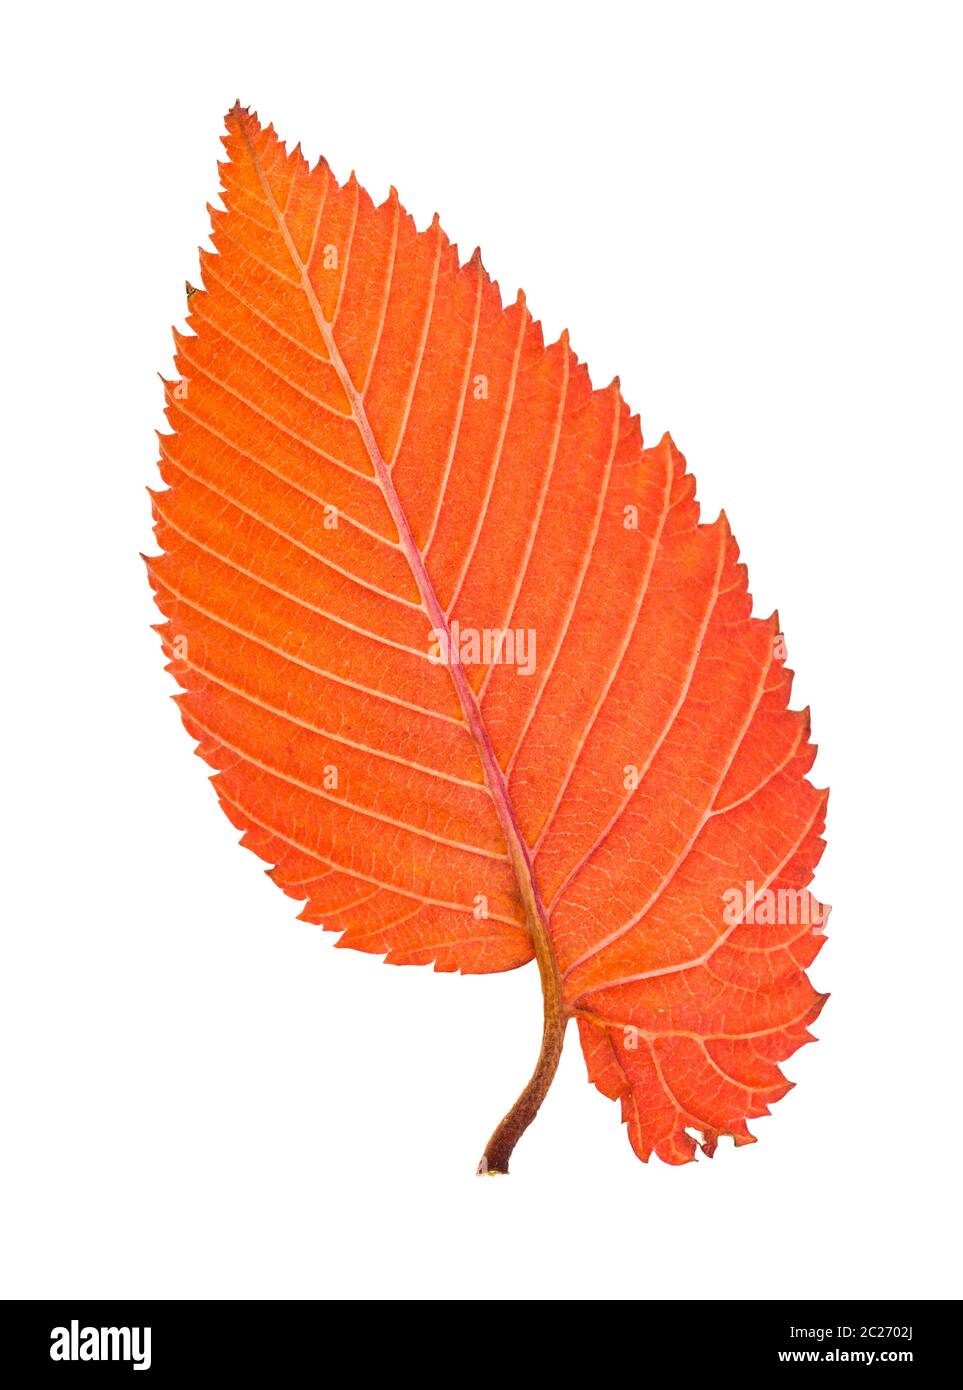 back side of orange and red fallen leaf of elm tree isolated on white background Stock Photo